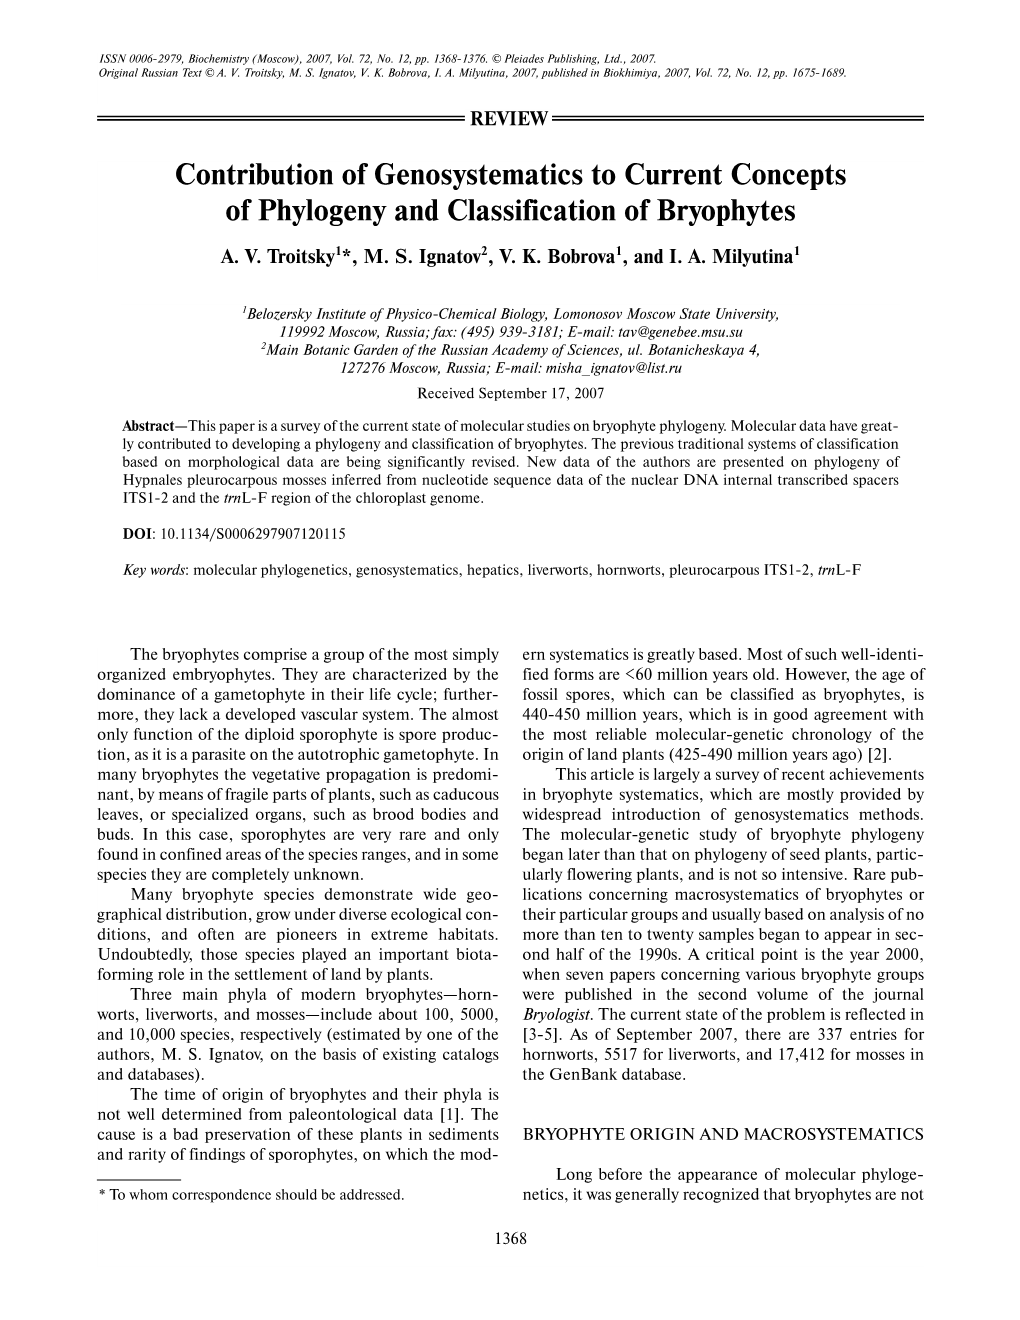 Contribution of Genosystematics to Current Concepts of Phylogeny and Classification of Bryophytes